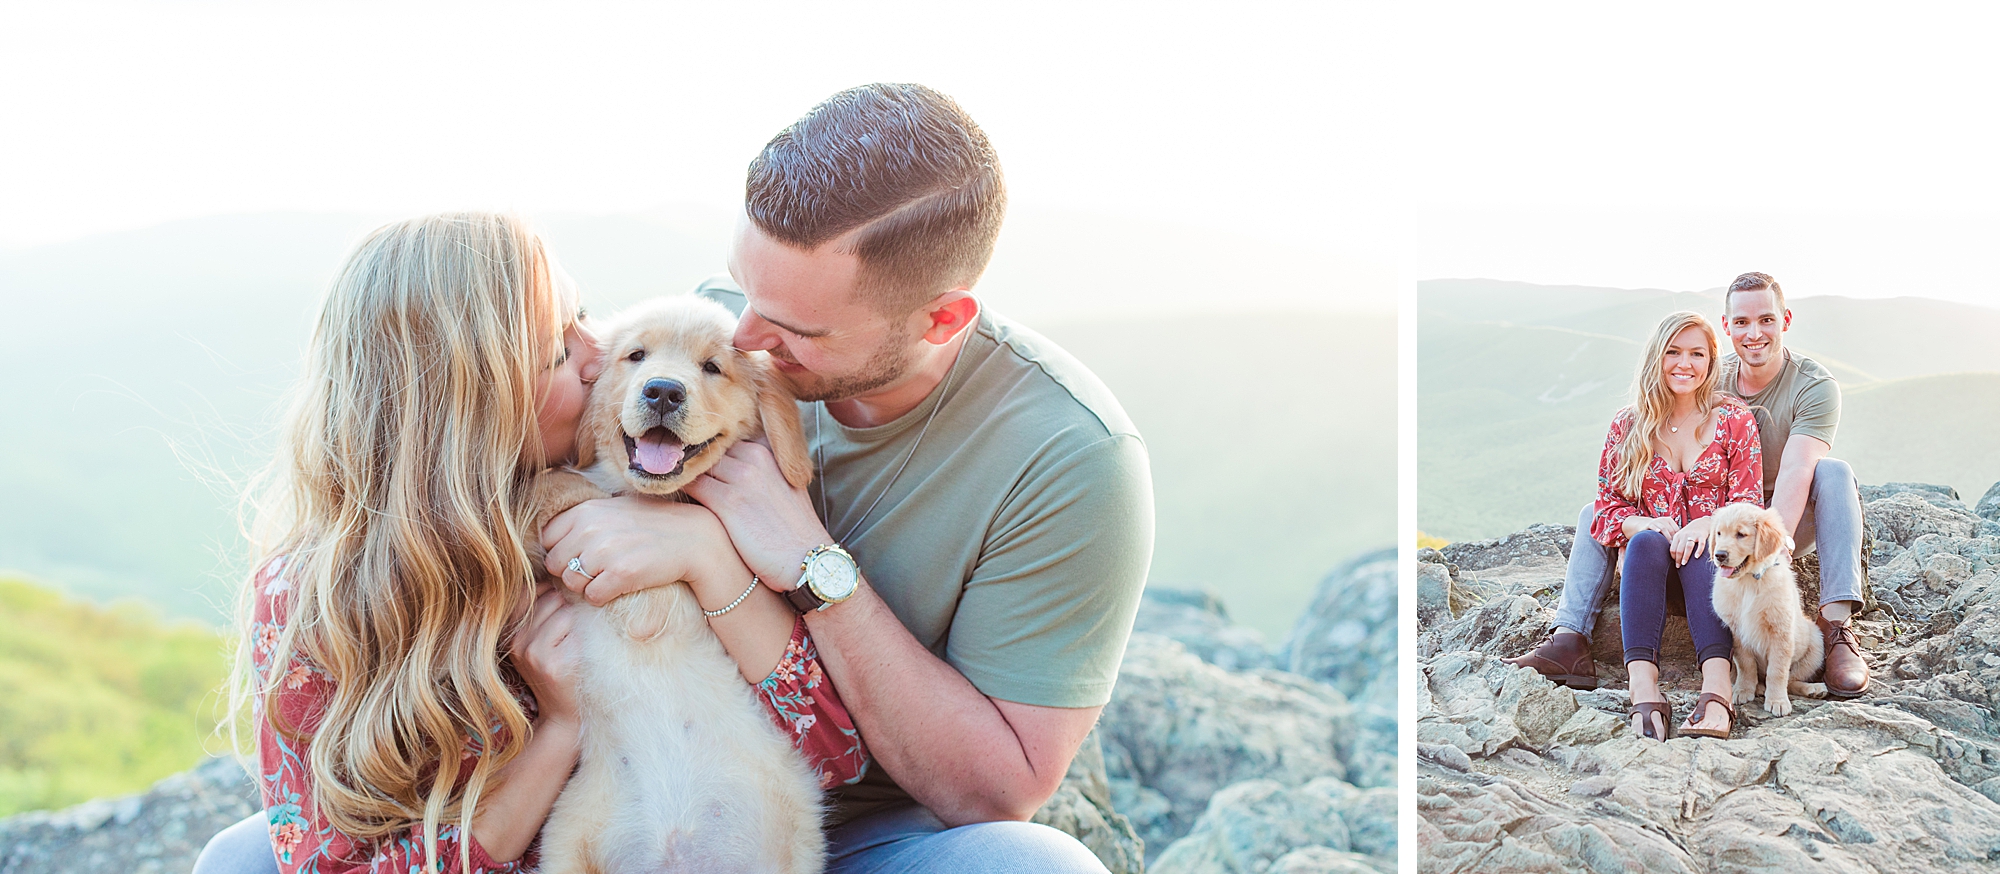 Golden retriever included in engagement session.